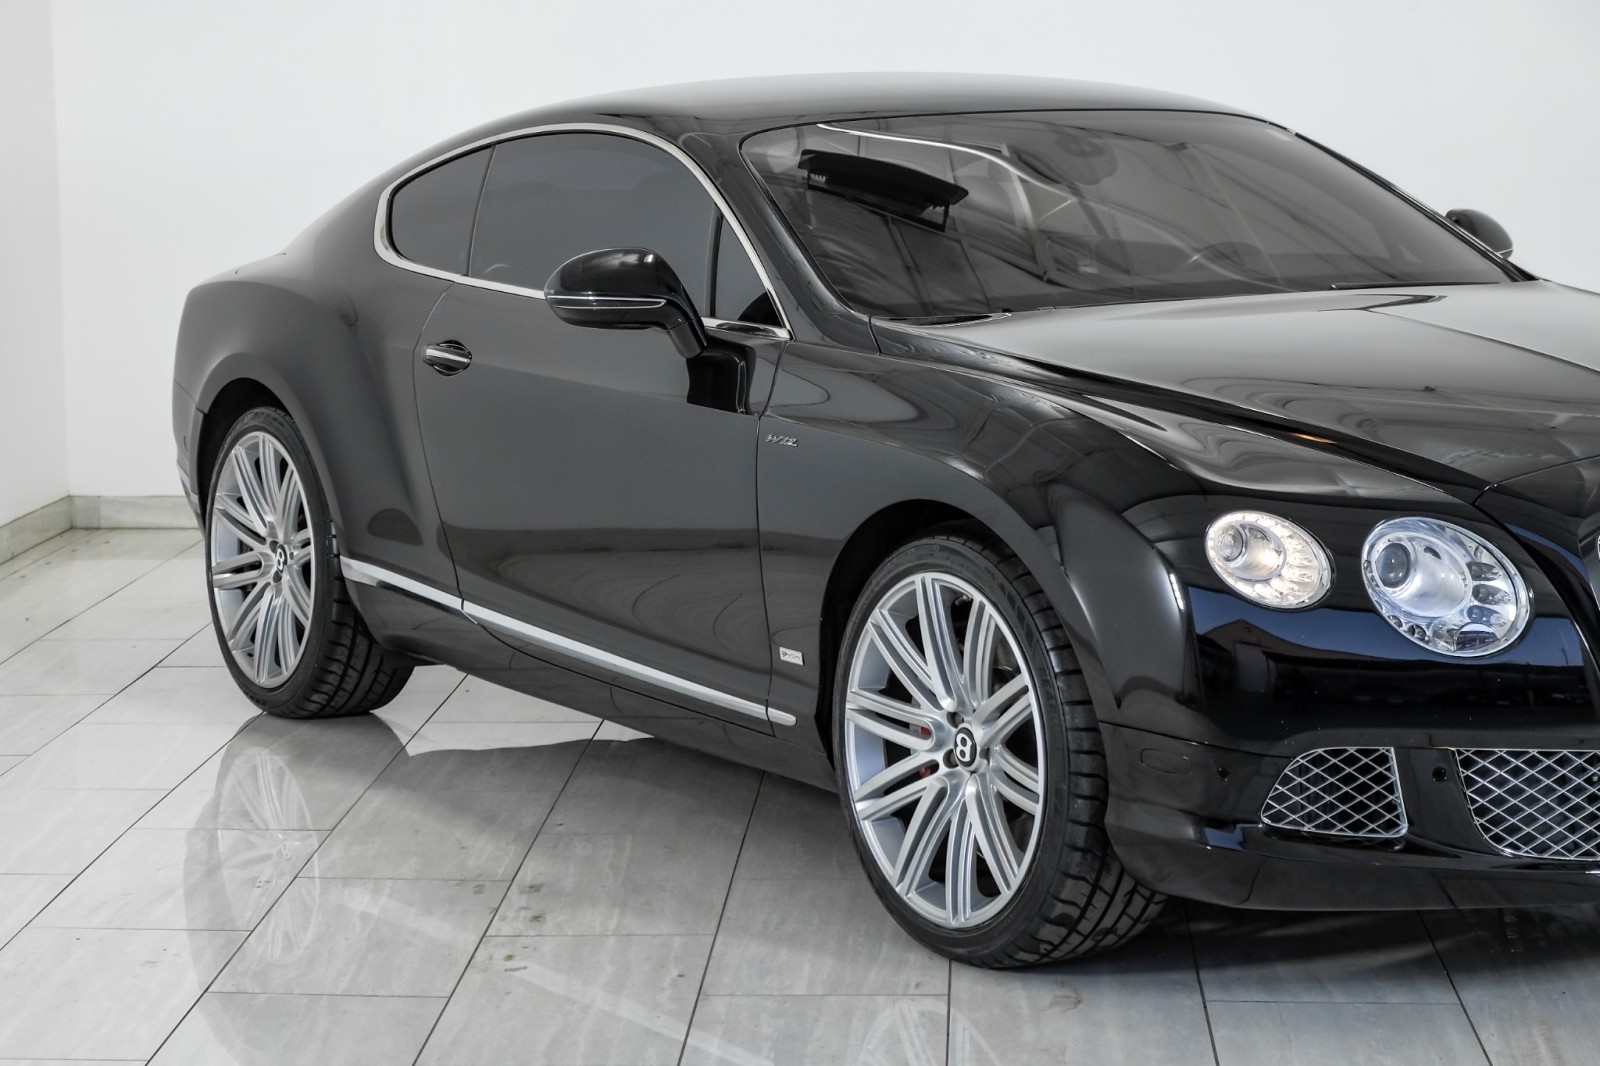 2013 Bentley Continental GT COUPE AWD W12 LA MANS EDITION 1 OF 48 NAVIGATION B 3